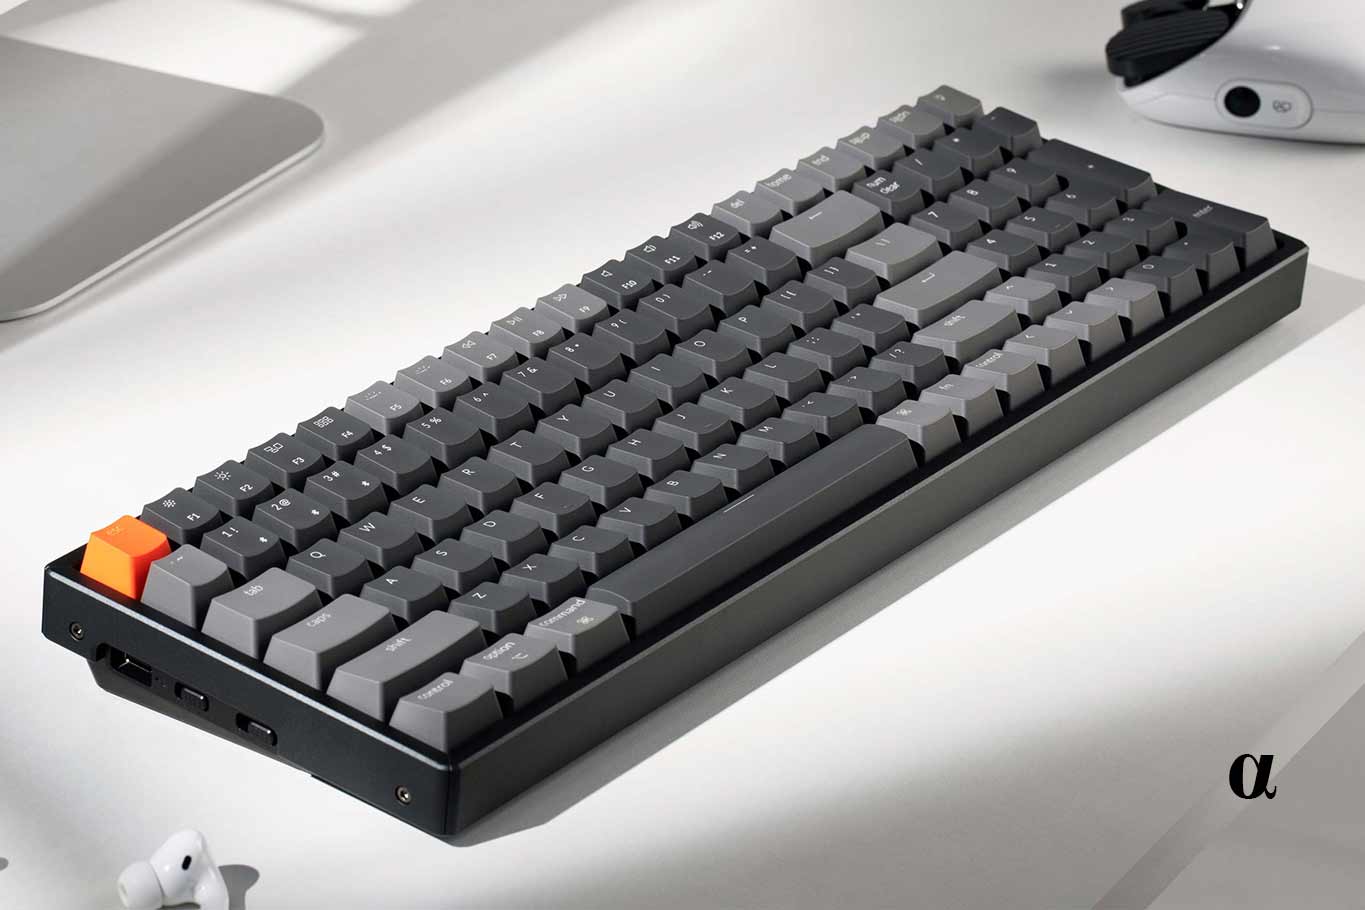 Best Keyboards for Coding 6